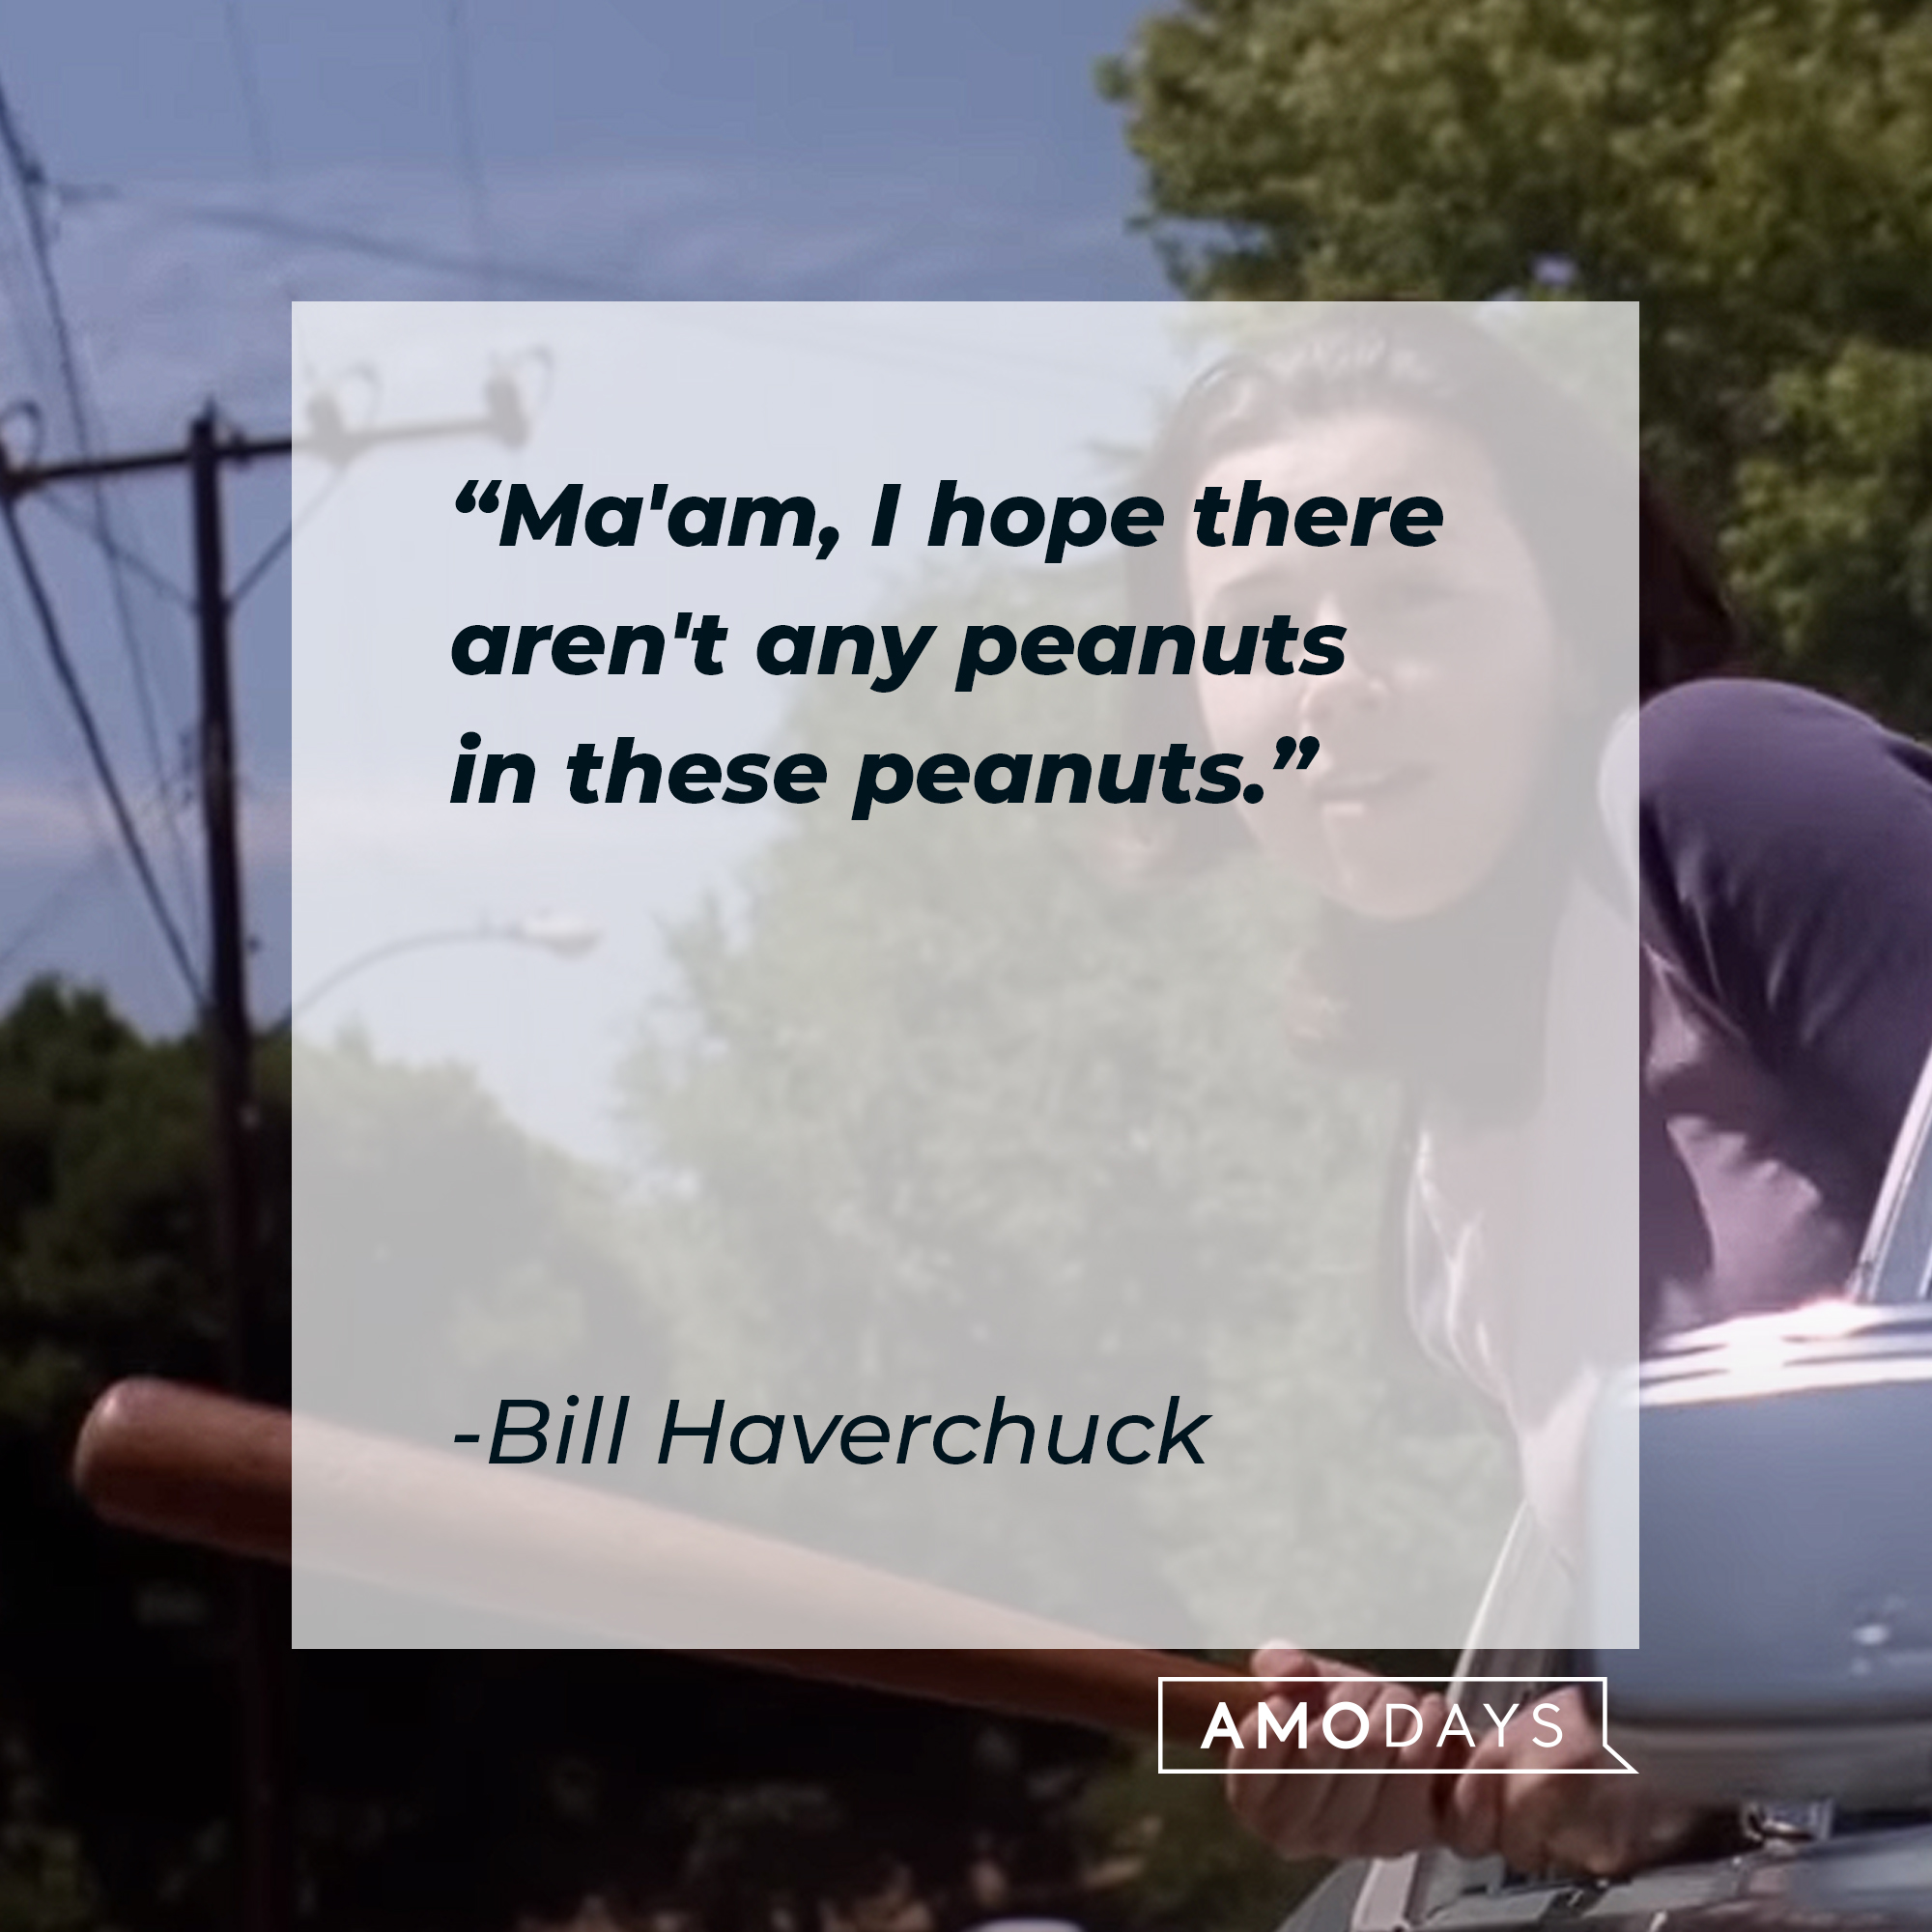 Bill Haverchuck's quote: "Ma'am, I hope there aren't any peanuts in these peanuts." | Source: Youtube.com/paramountmovies